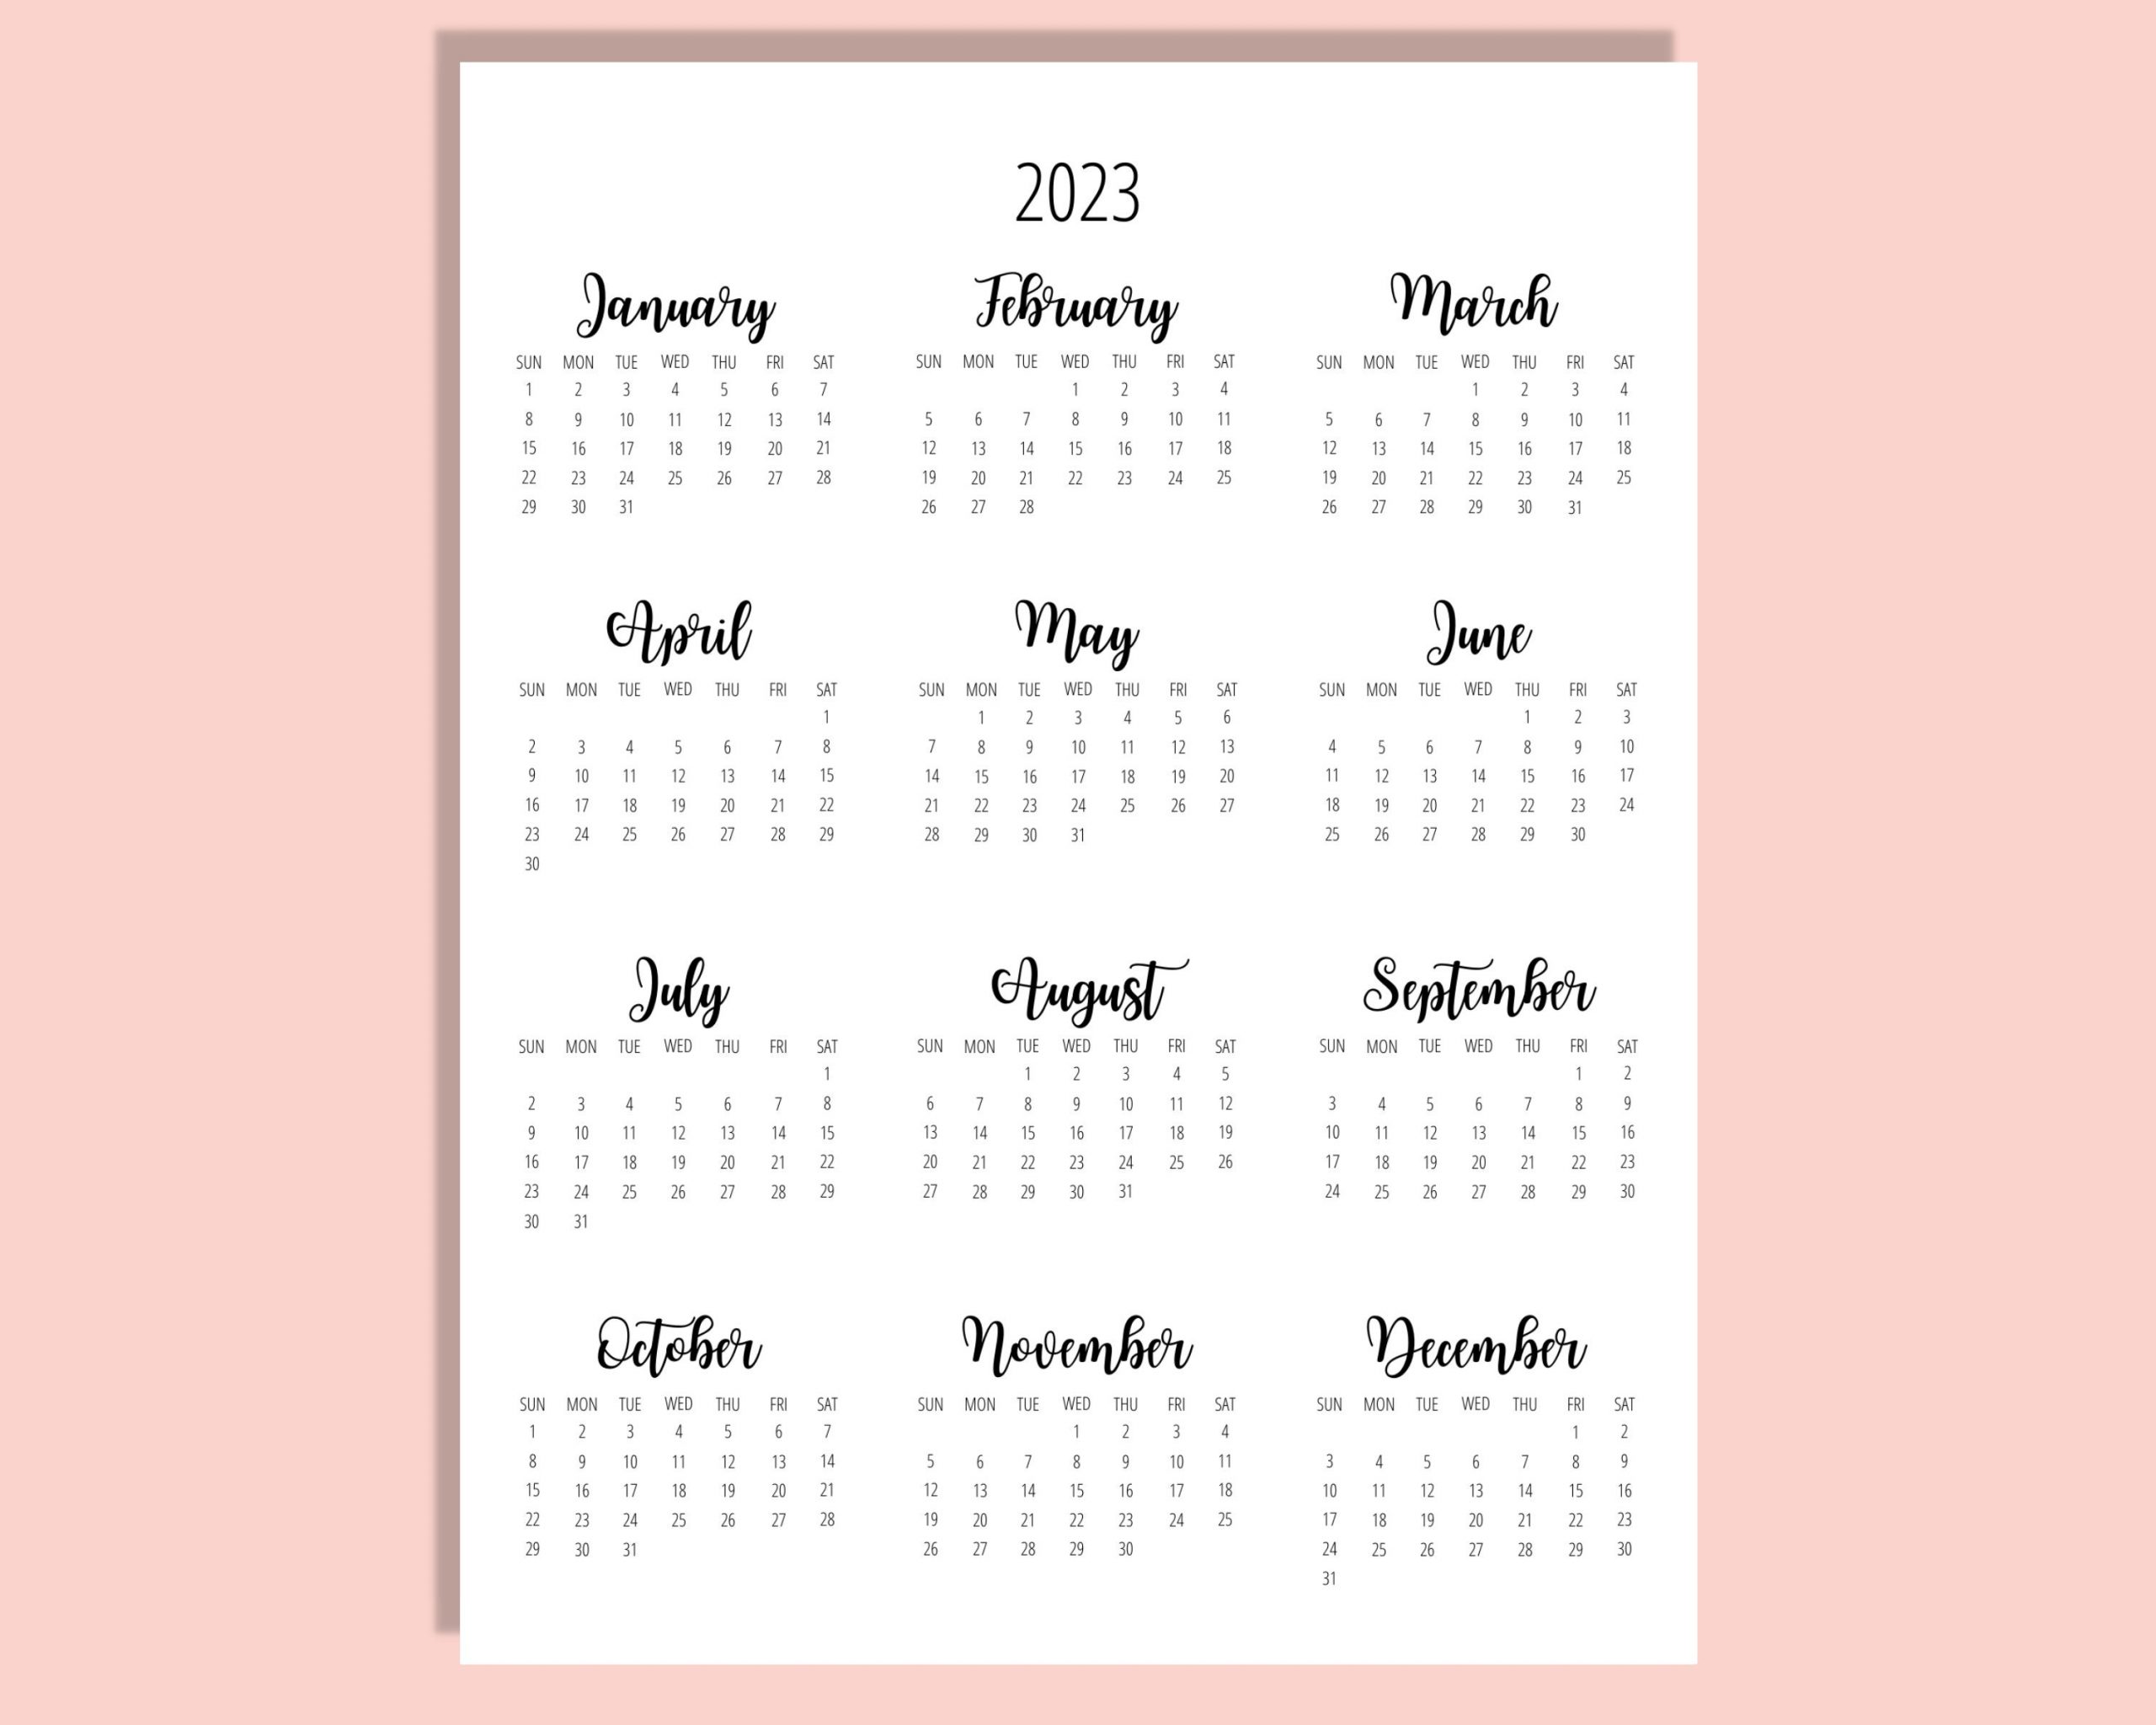 2023 Calendar Template 8 5 X 11 Inches Vertical Year At A 1